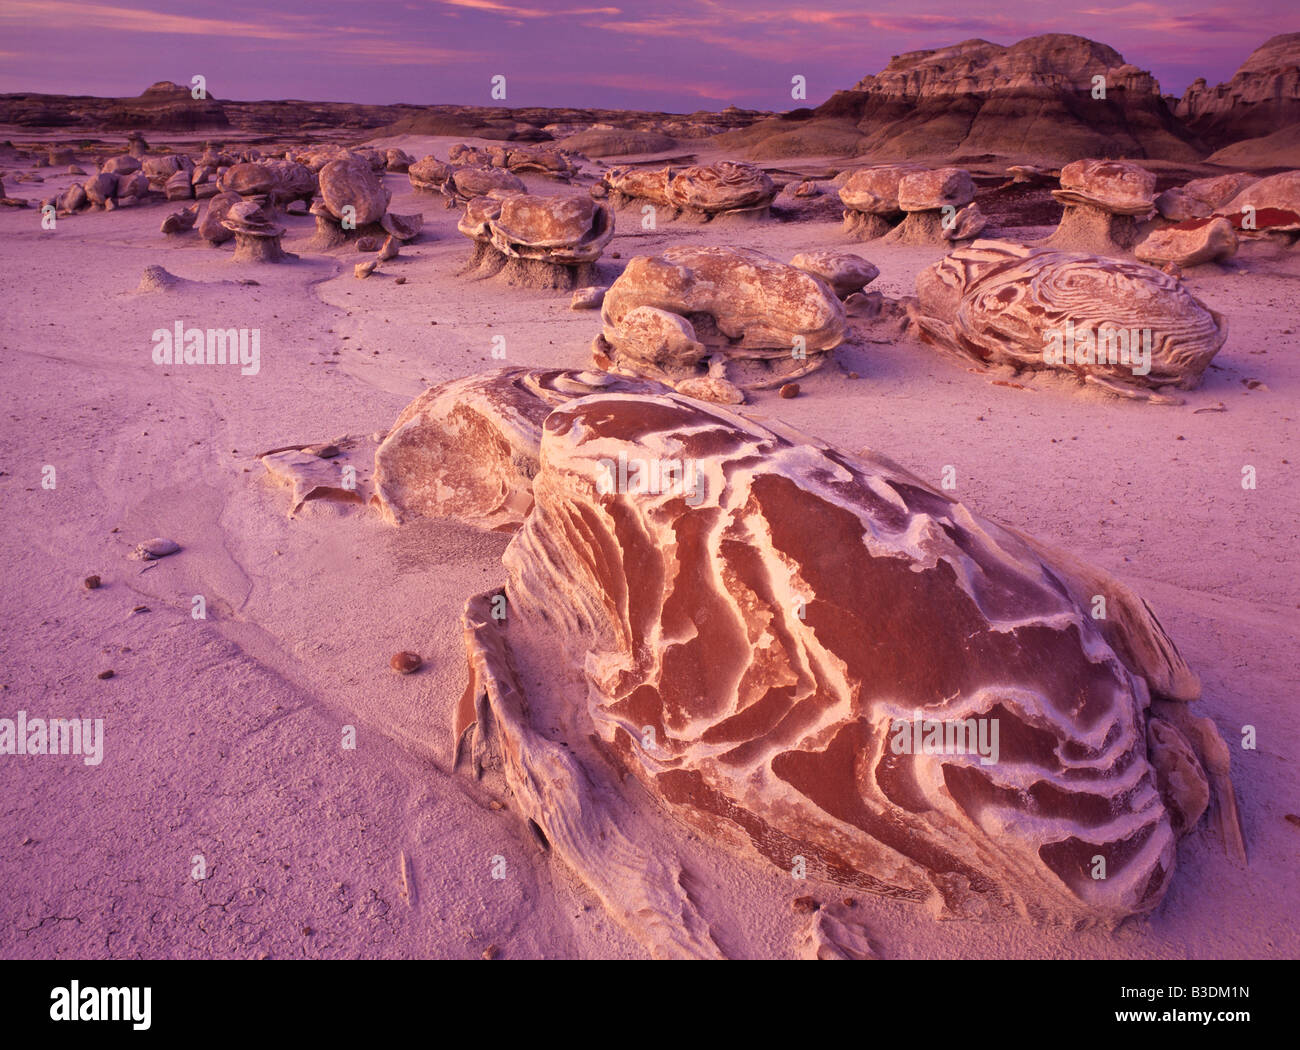 The Cracked Eggs rock formation at sunset in Bisti Badlands New Mexico Stock Photo